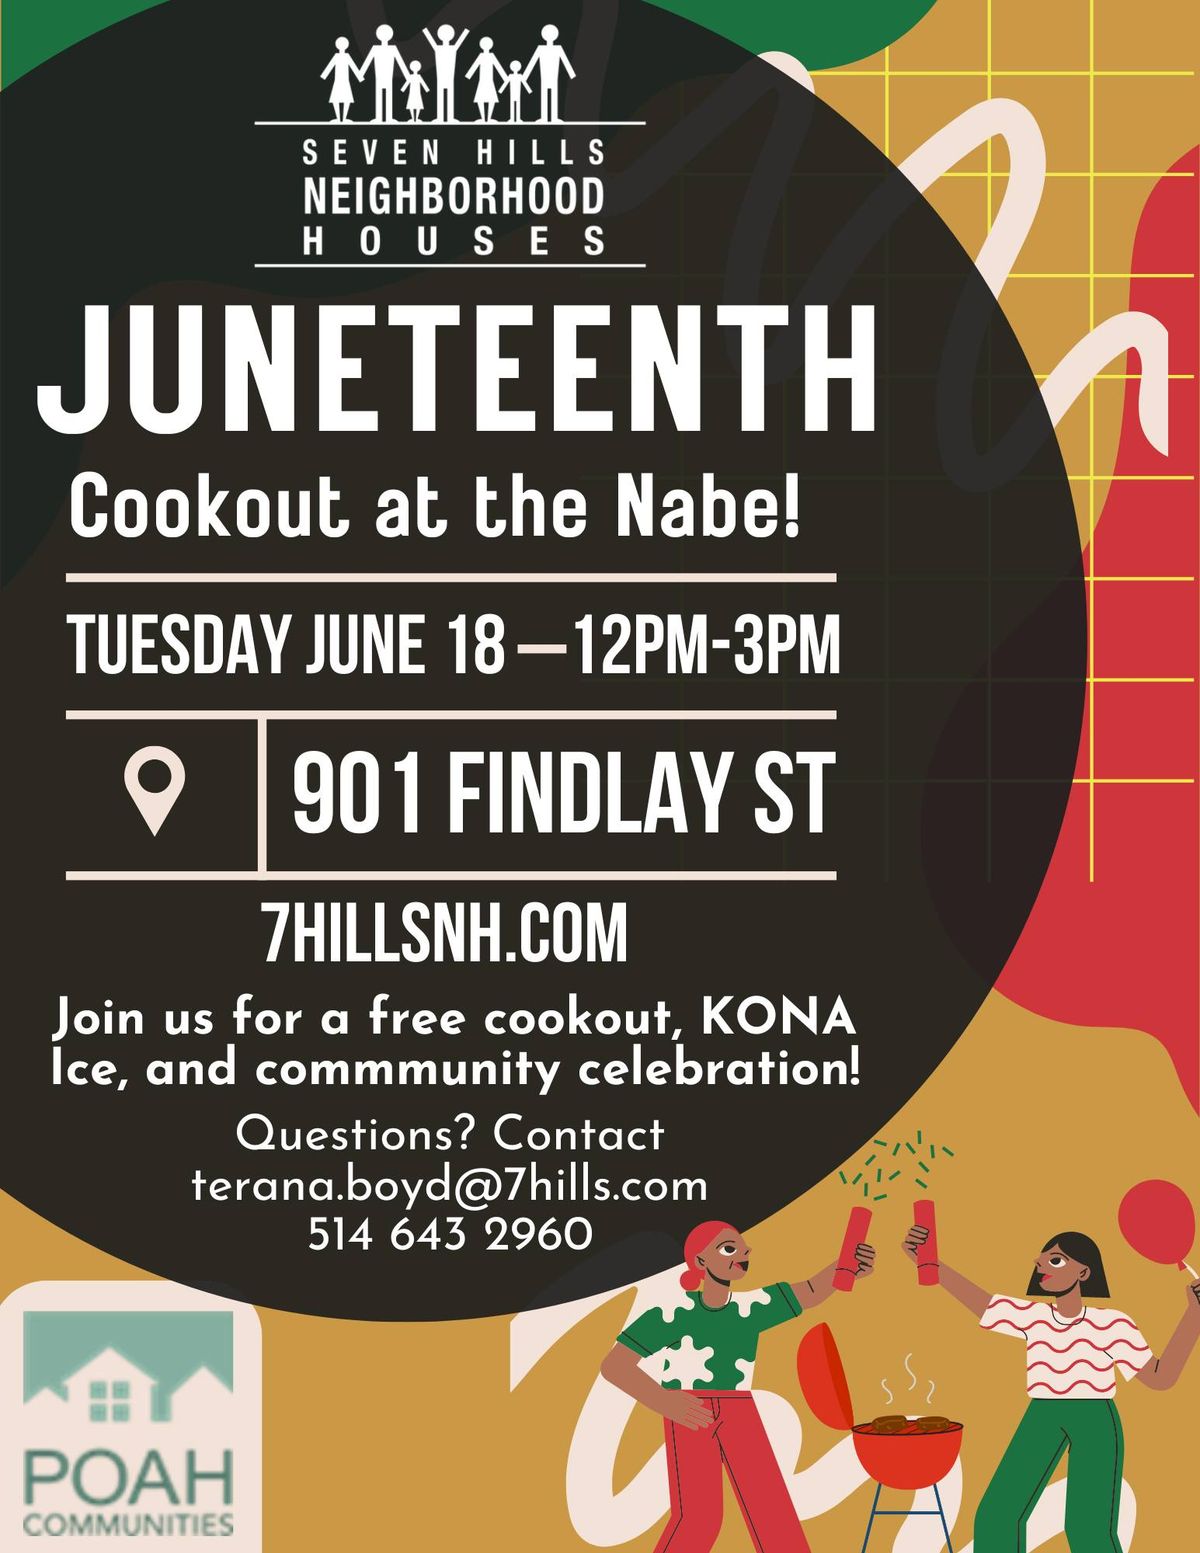 Juneteenth Cookout At The Nabe! Free West End Neighborhood Cookout and Celebration!